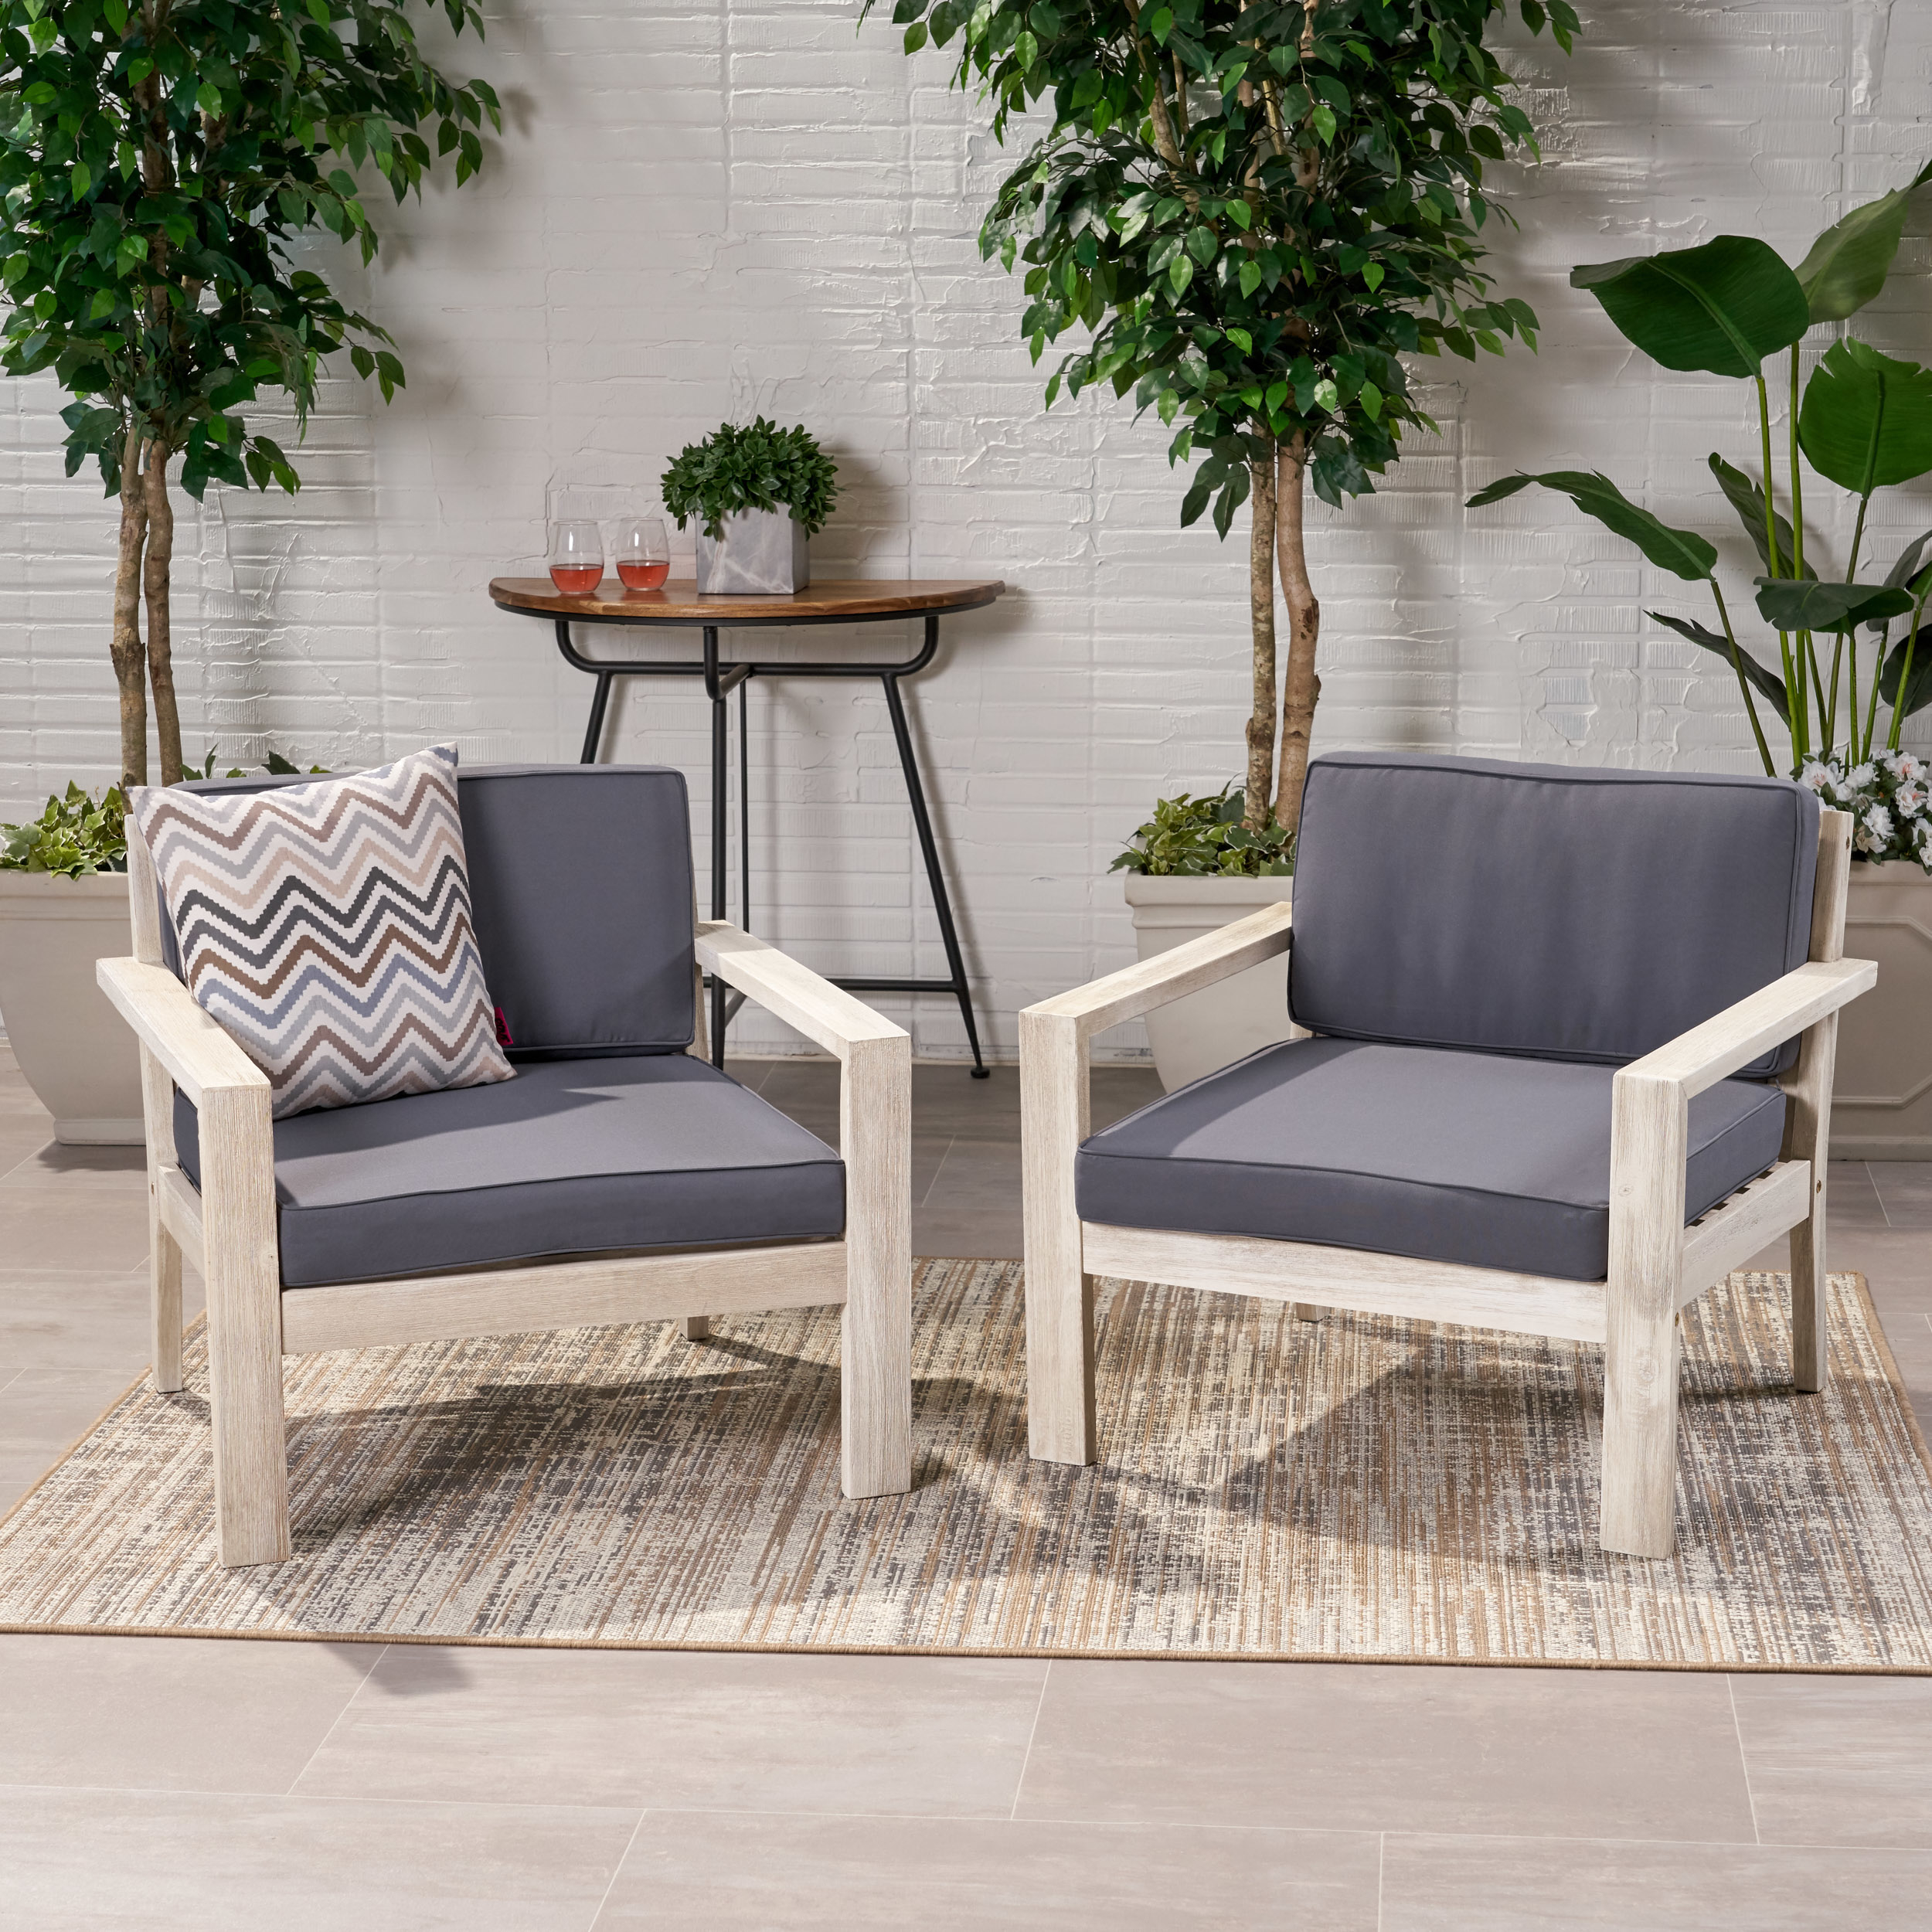 Beryl Outdoor Acacia Wood Club Chairs With Cushions (Set Of 2) - Brushed Light Gray Wash, Dark Teal